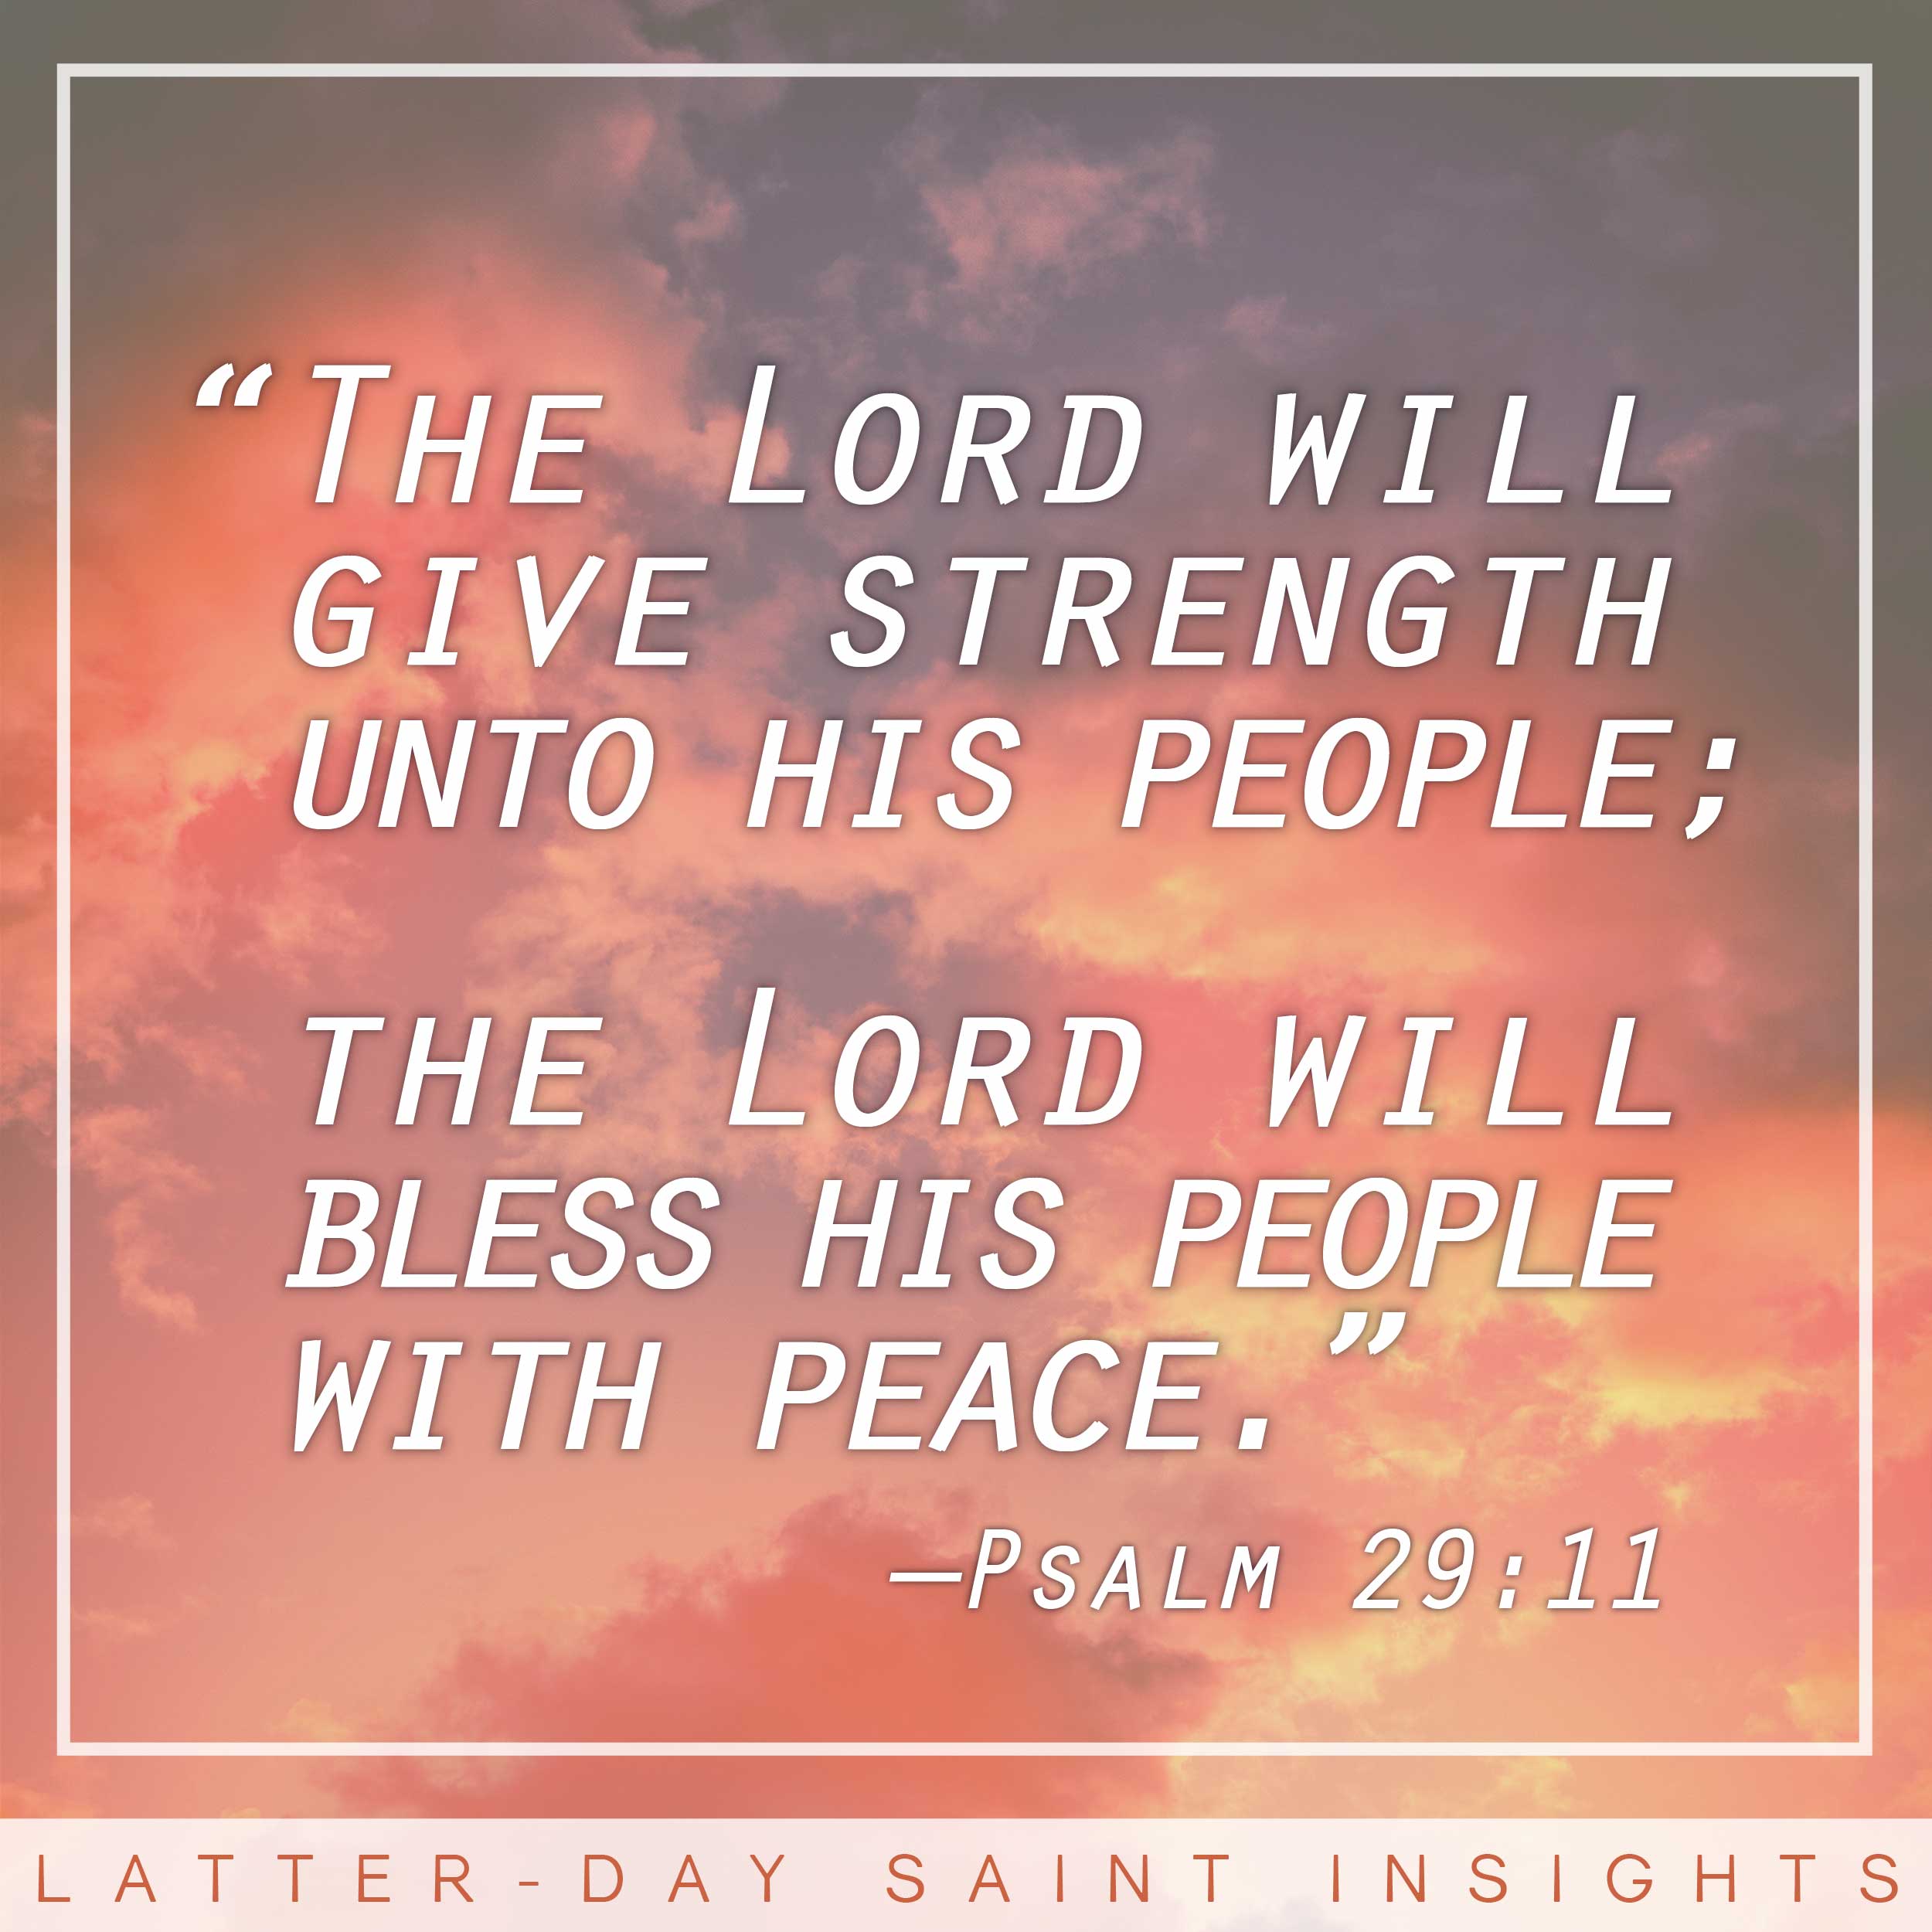 “The Lord will give strength unto his people; the Lord will bless his people with peace.” By Psalm